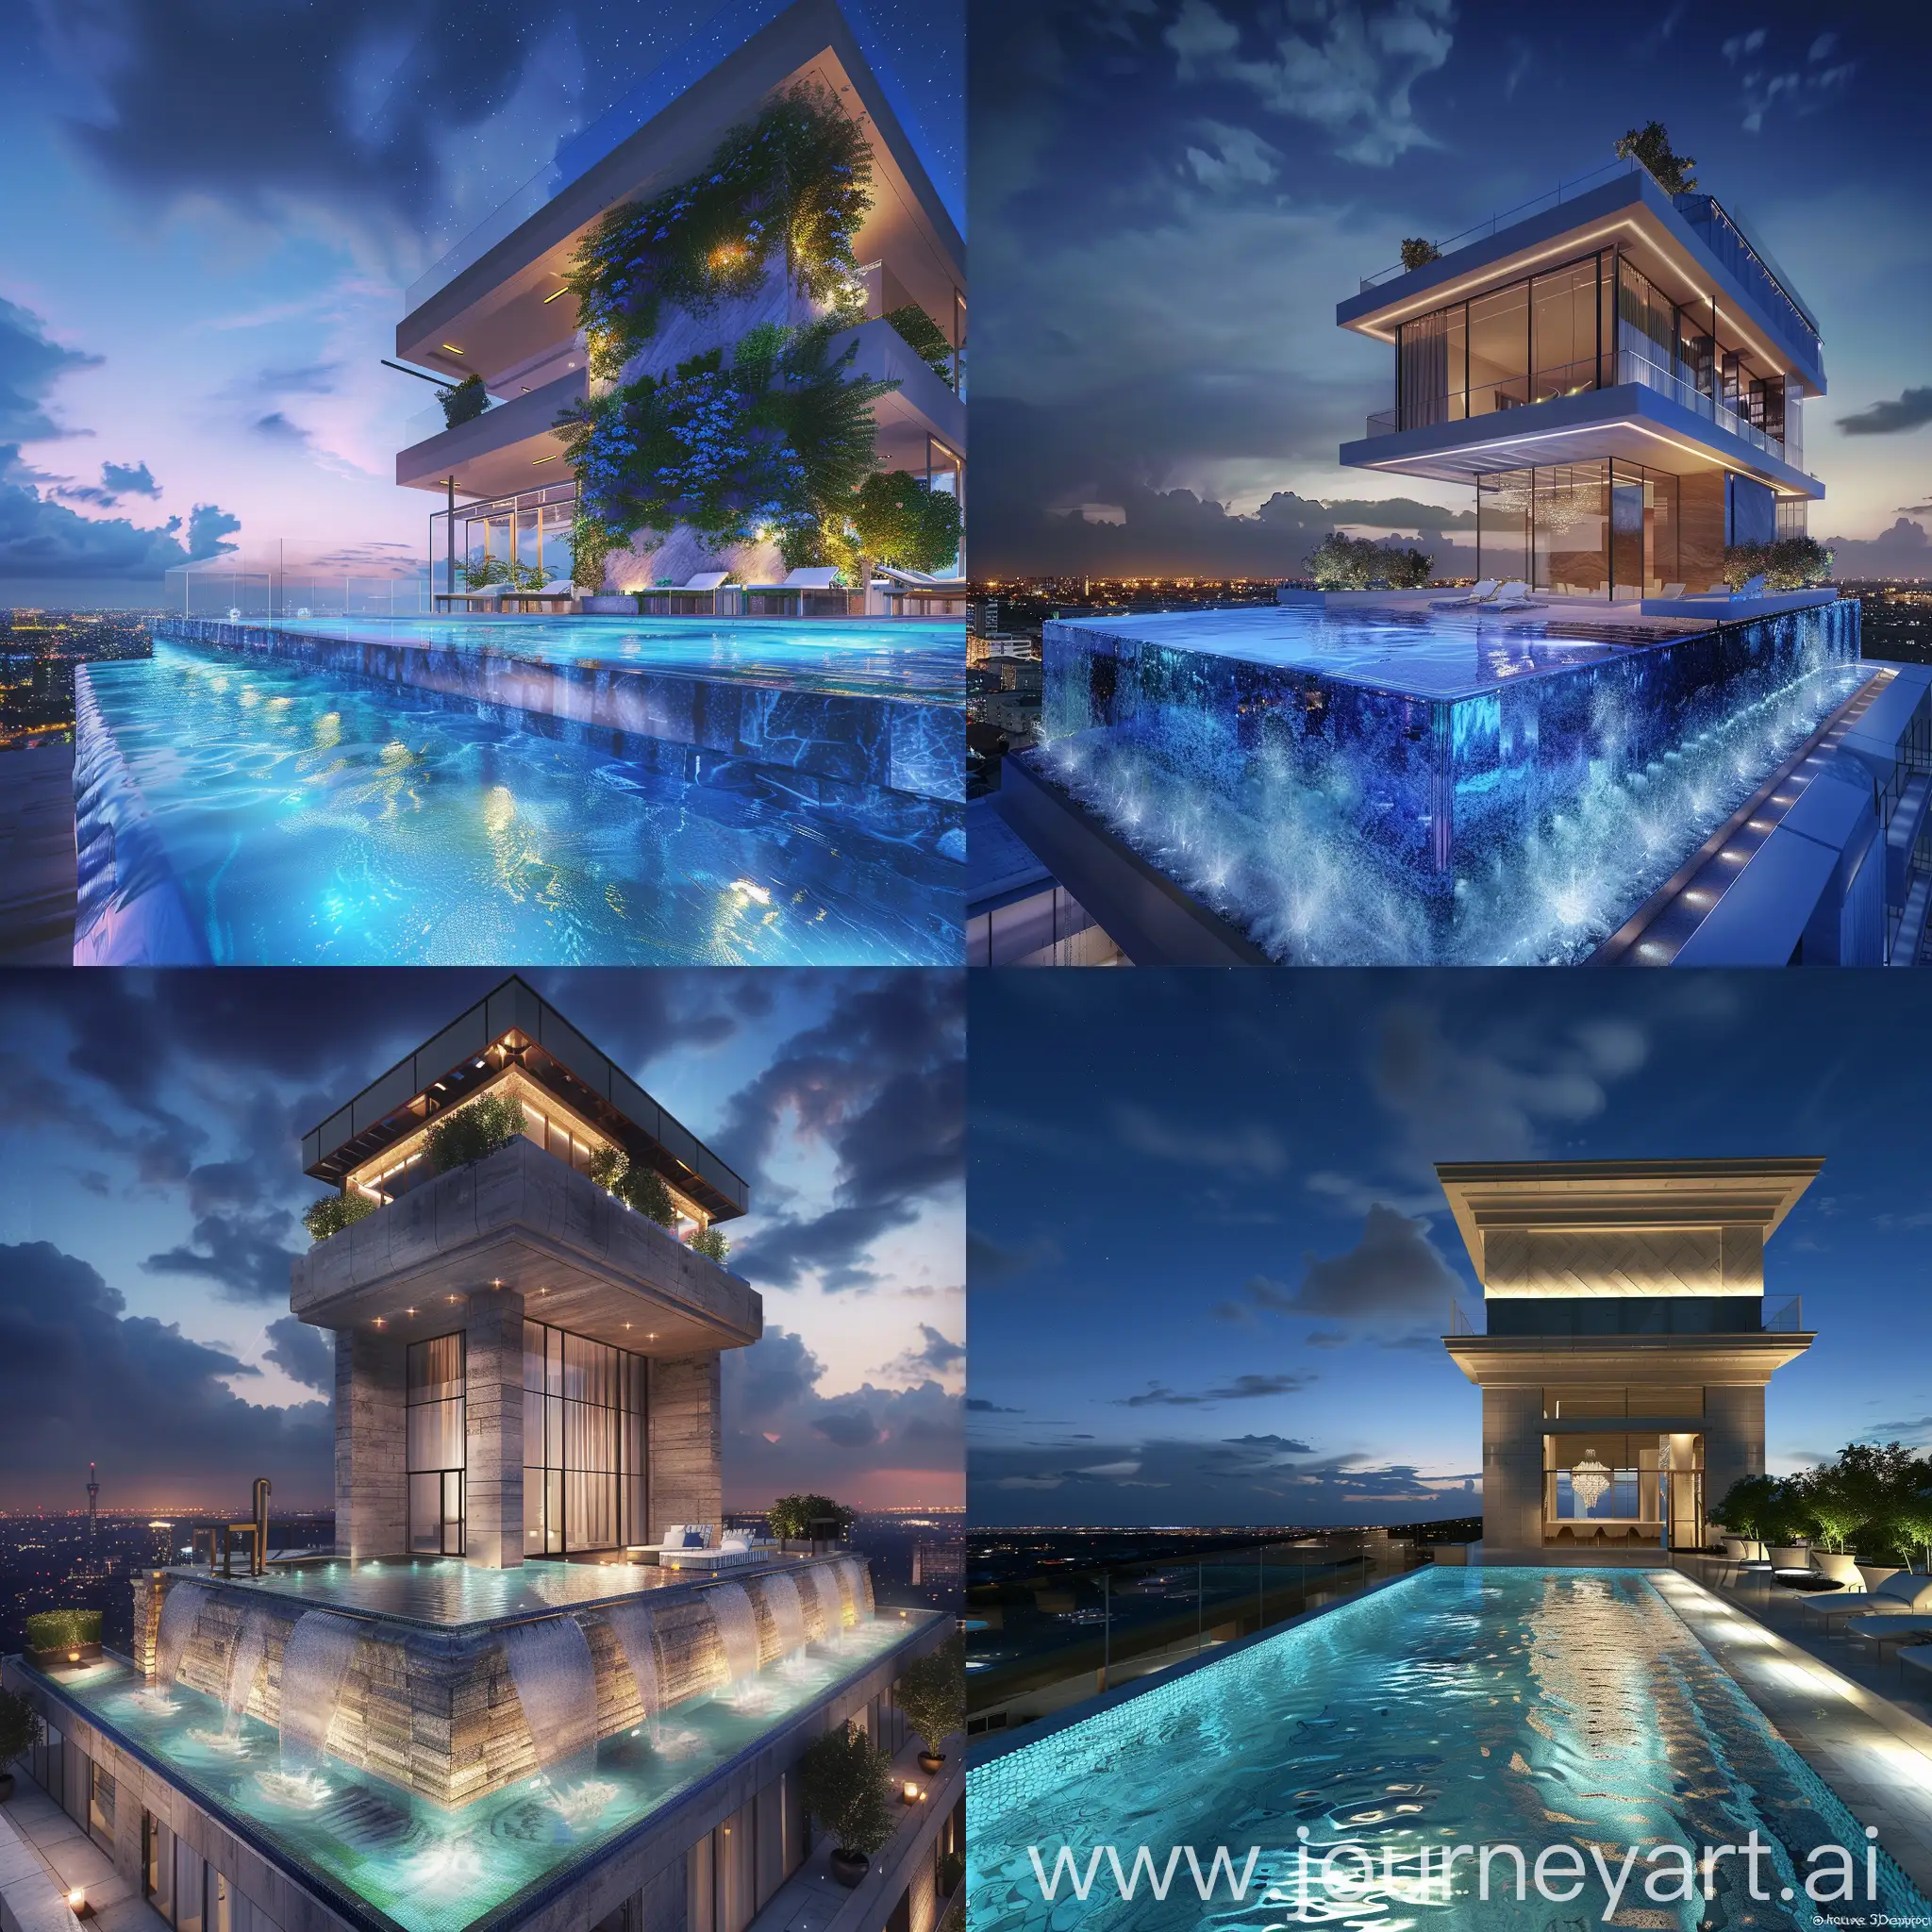 Awardwinning-3D-Architectural-Rooftop-Swimming-Pool-in-Elegant-HighRise-Apartment-Tower